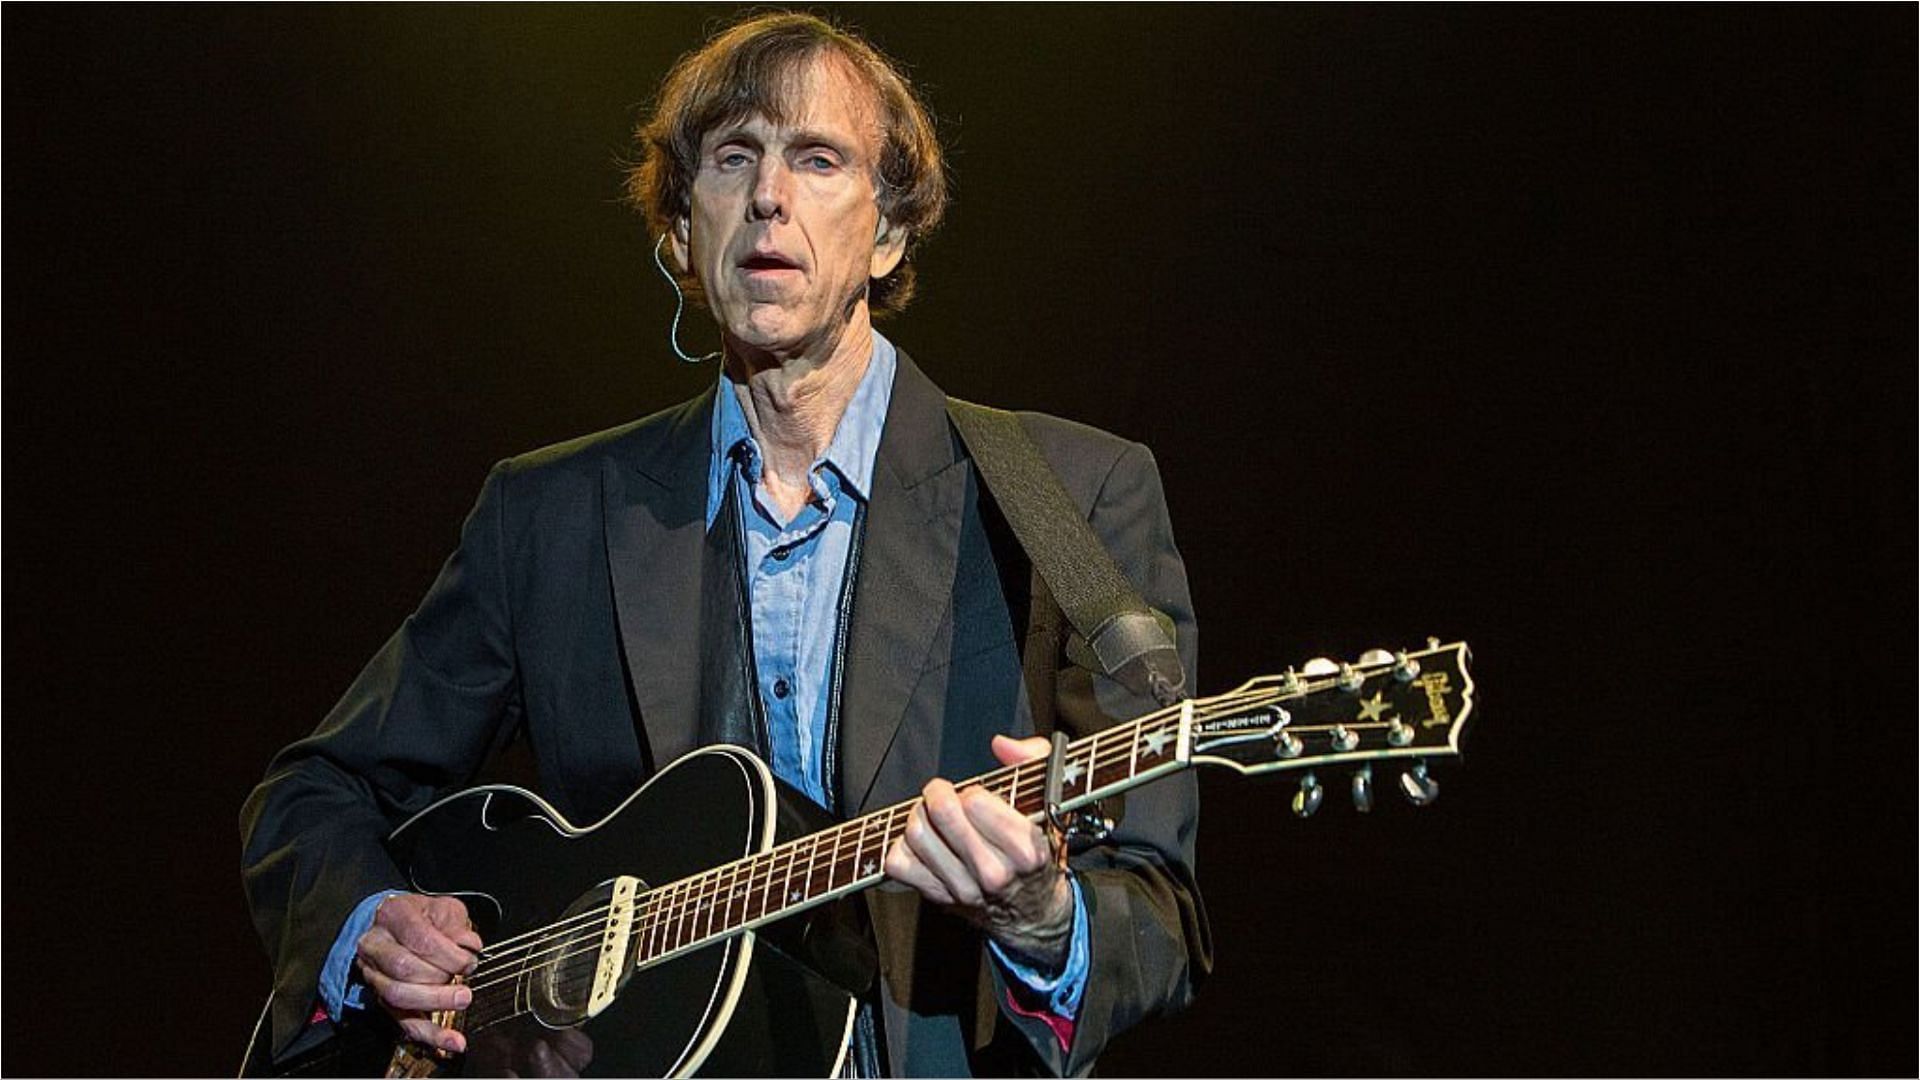 Tom Leadon recently died at the age of 70 (Image via Daniel Knighton/Getty Images)